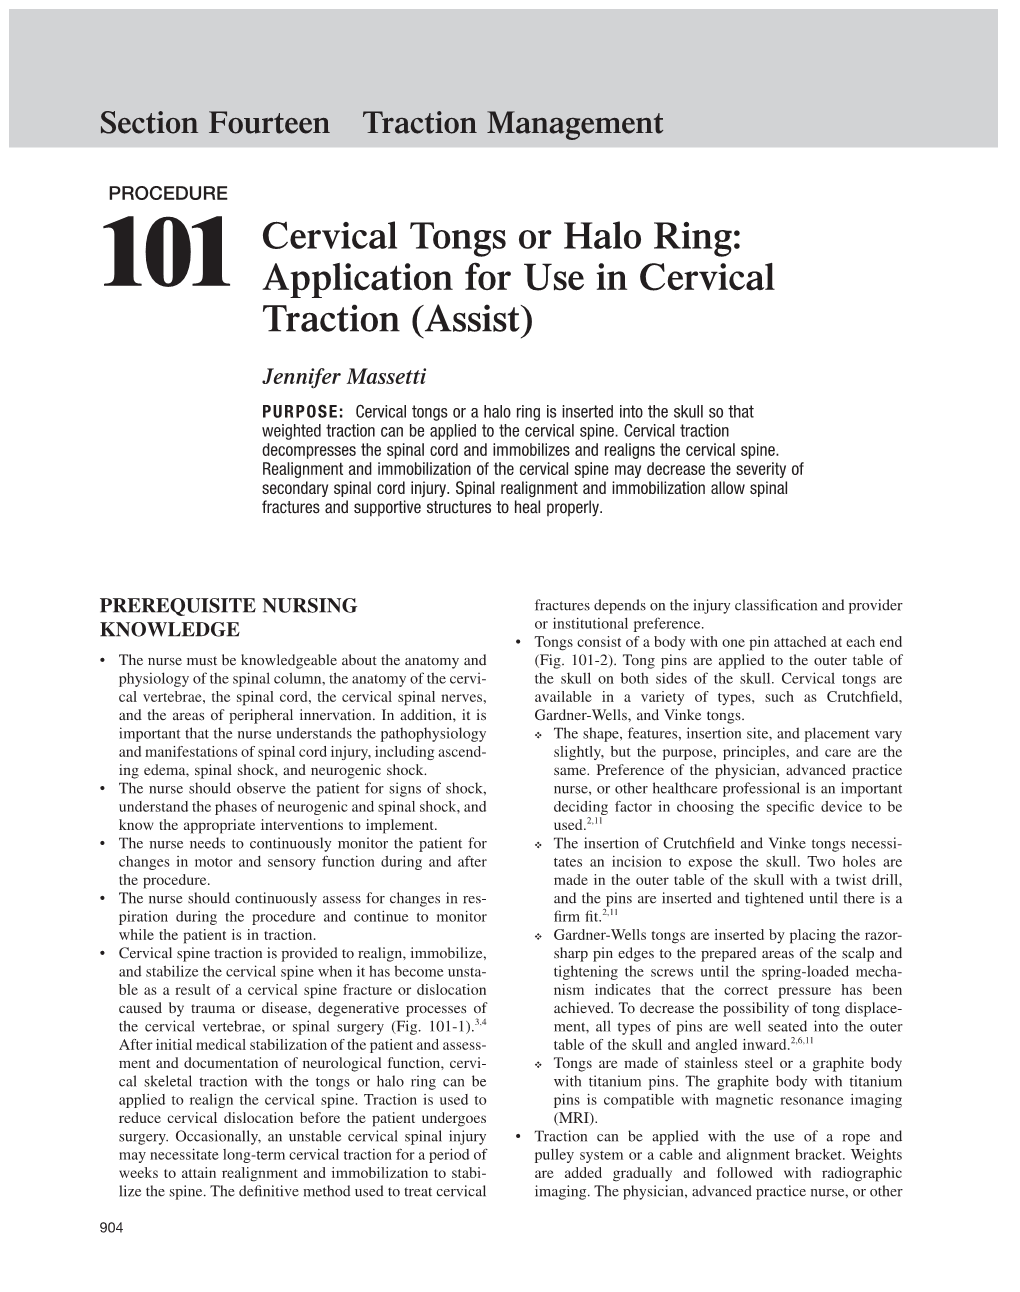 101 Cervical Tongs Or Halo Ring: Application for Use in Cervical Traction (Assist) 905